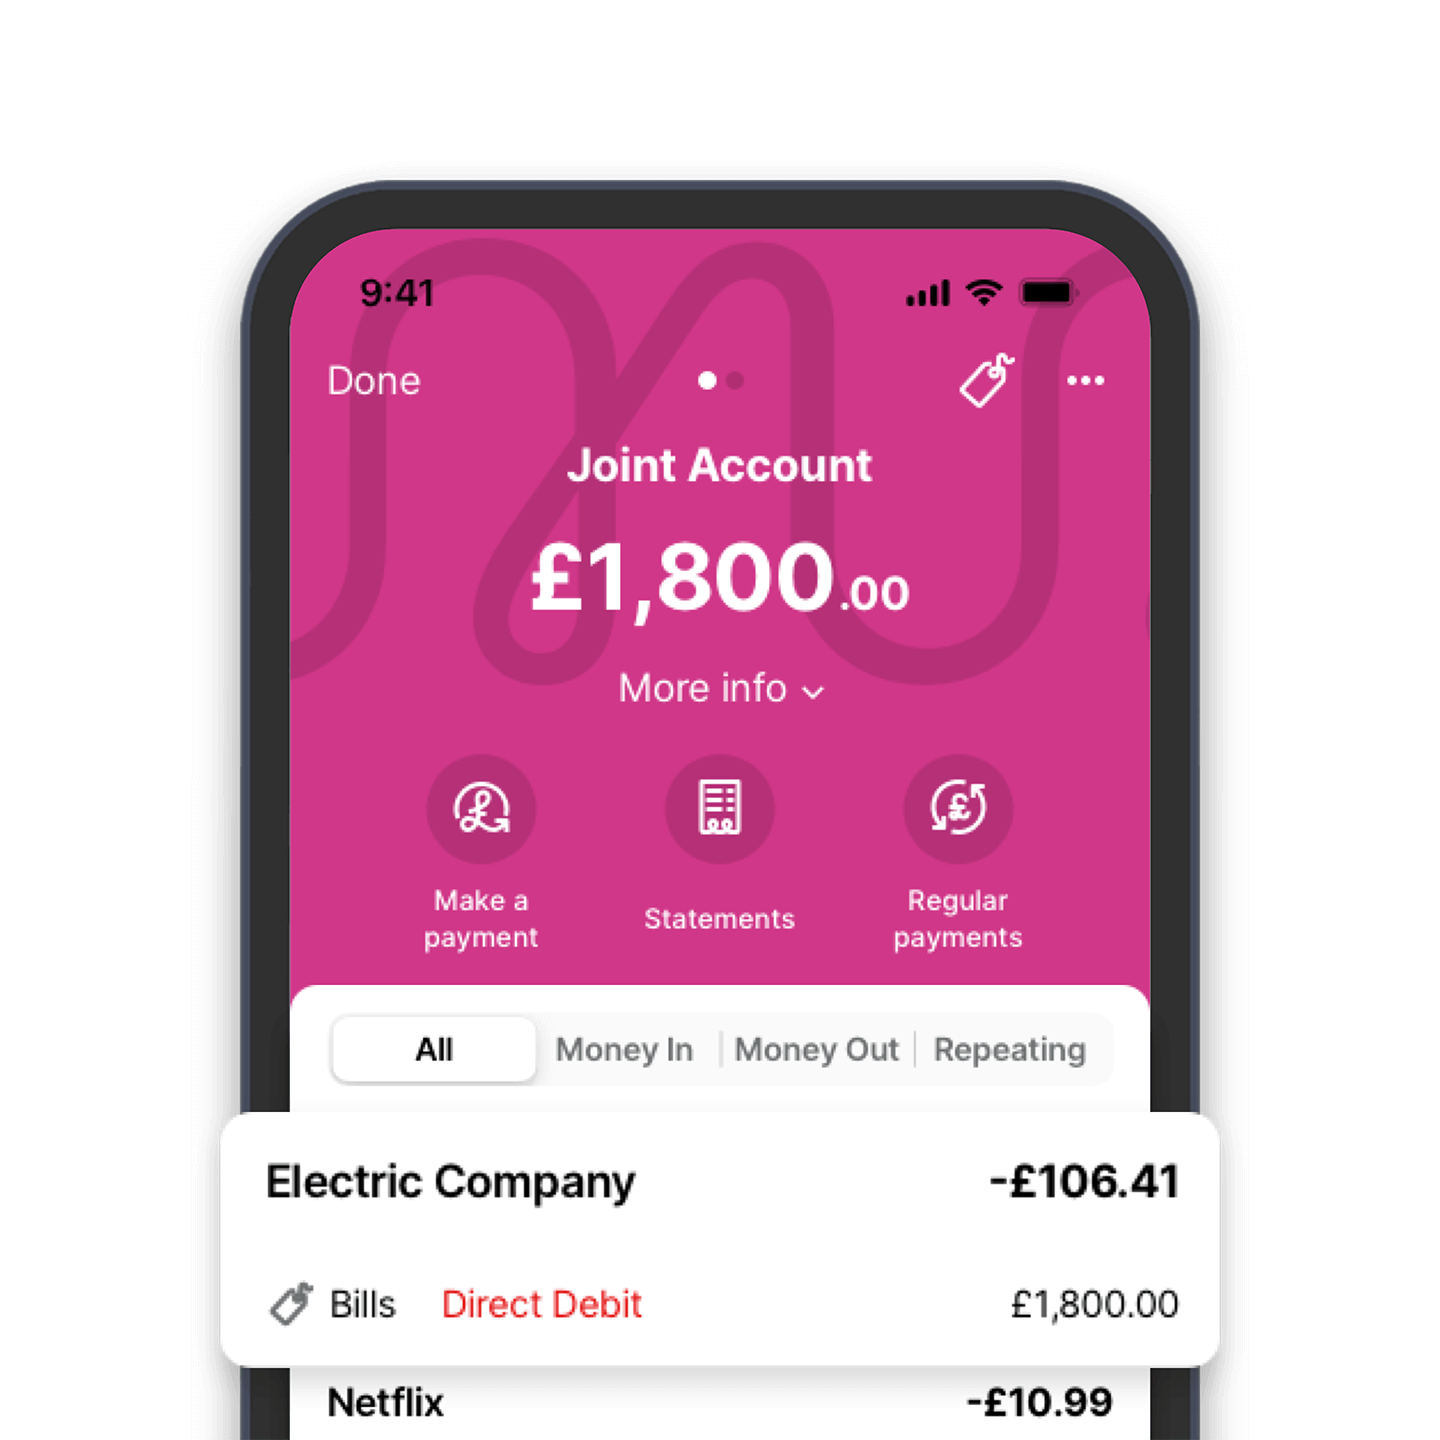 A phone with the app on it, showing a Joint account with a balance of £1,800. Beneath are two transactions - Electric company, bills - direct debit, minus £106.41, and Netflix, £10.99. 